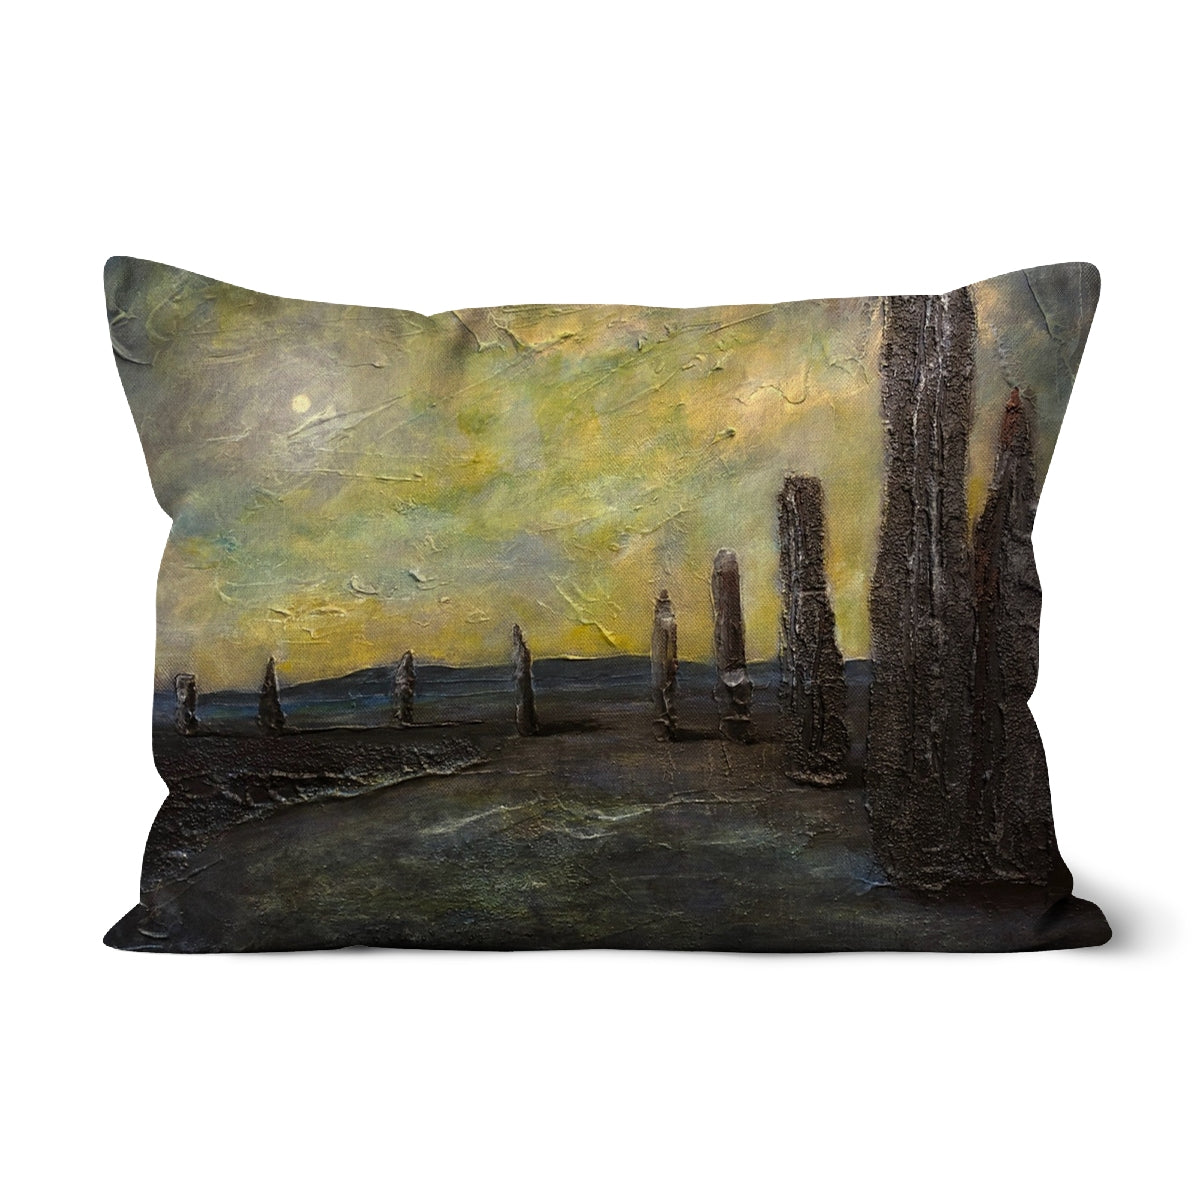 An Ethereal Ring Of Brodgar Art Gifts Cushion-Cushions-Orkney Art Gallery-Faux Suede-19"x13"-Paintings, Prints, Homeware, Art Gifts From Scotland By Scottish Artist Kevin Hunter